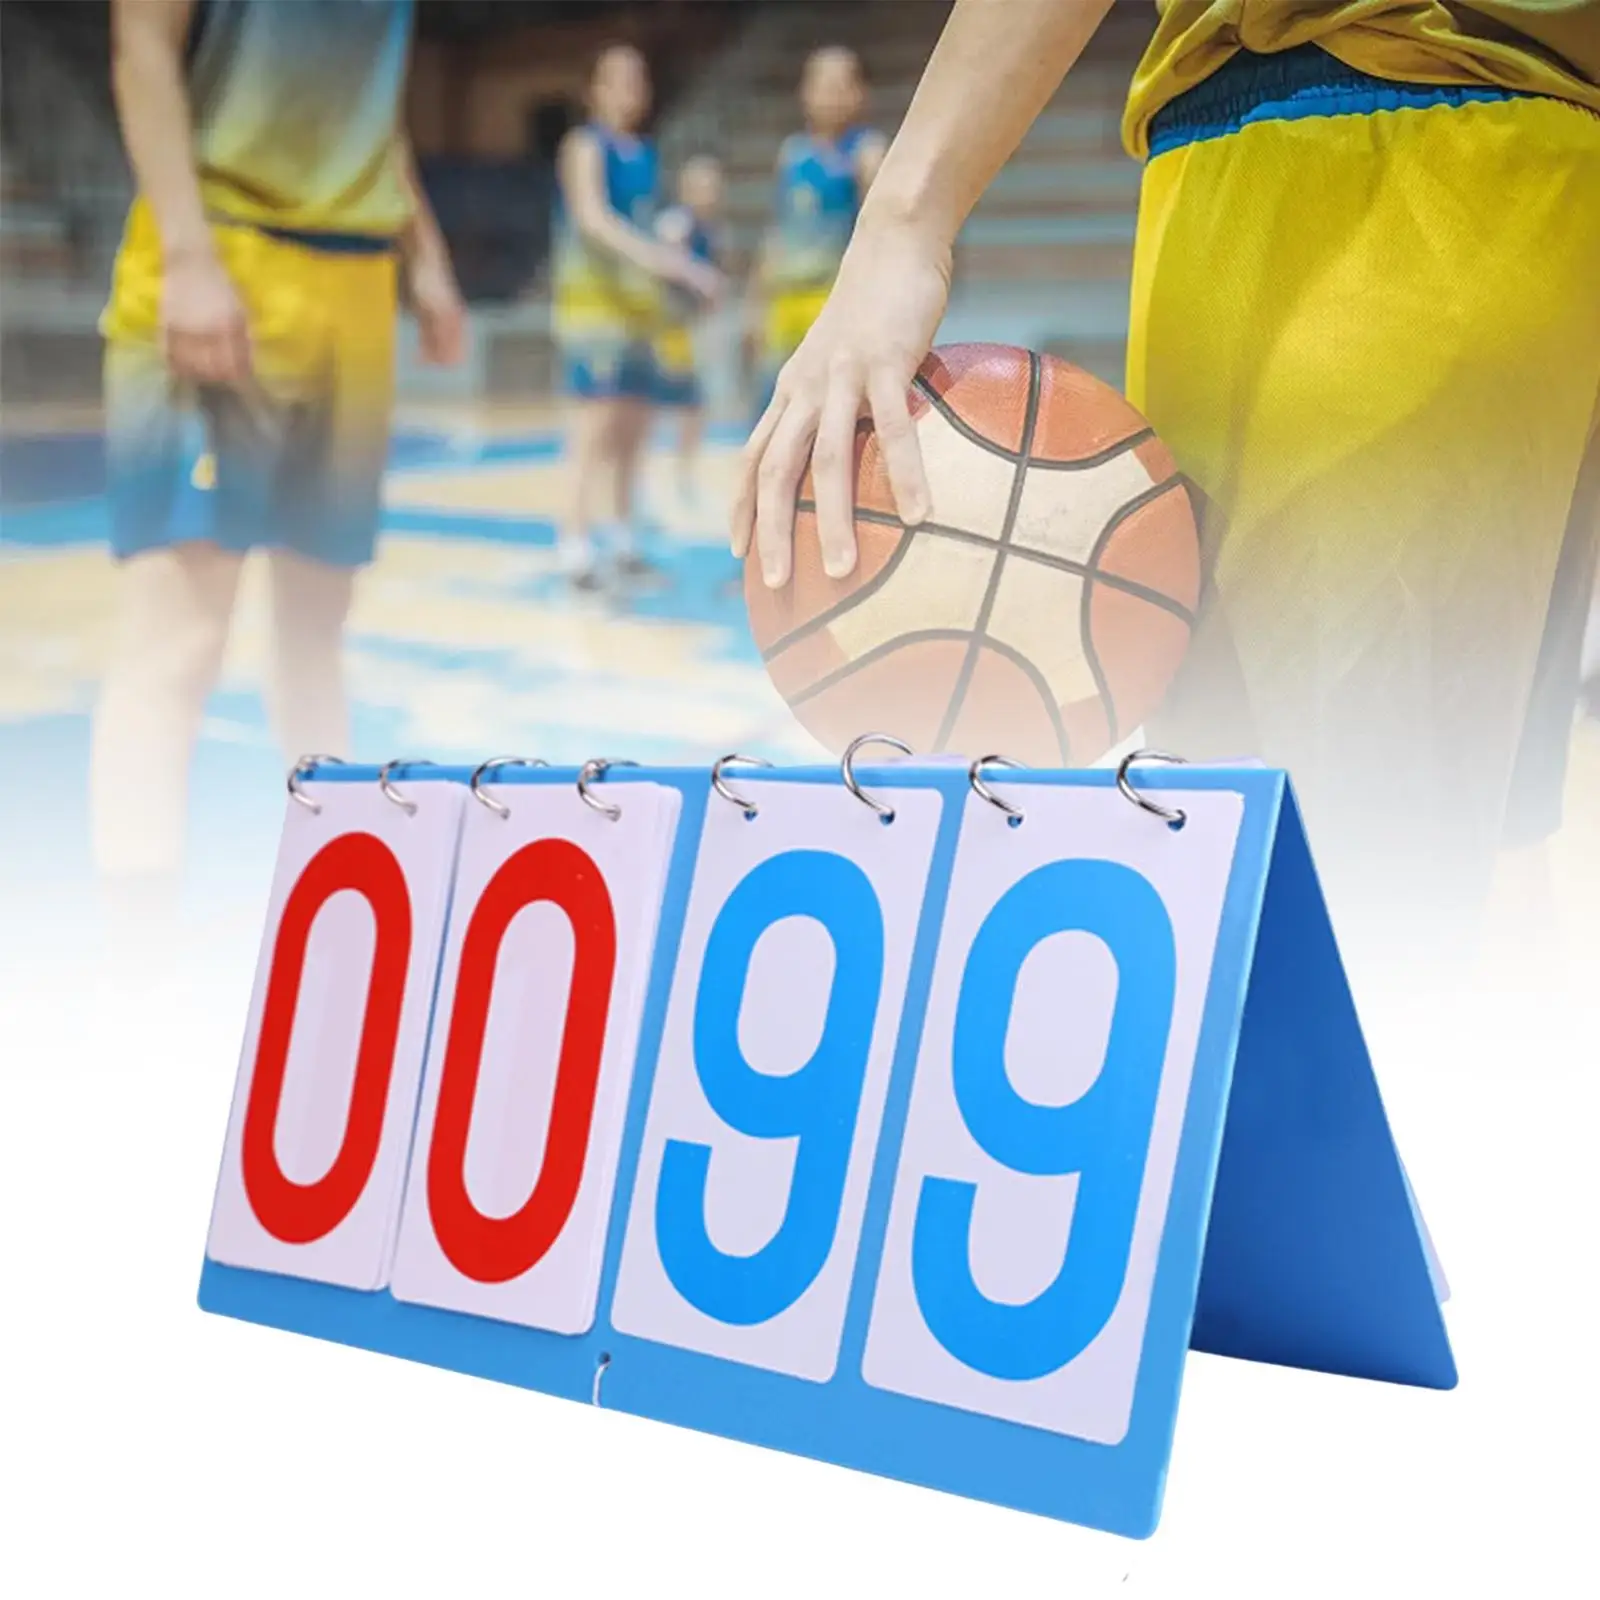 Table Top Scoreboard Collapsible Waterproof Score Turn Easily Turn Premium for Volleyball Football Badminton Basketball Tennis